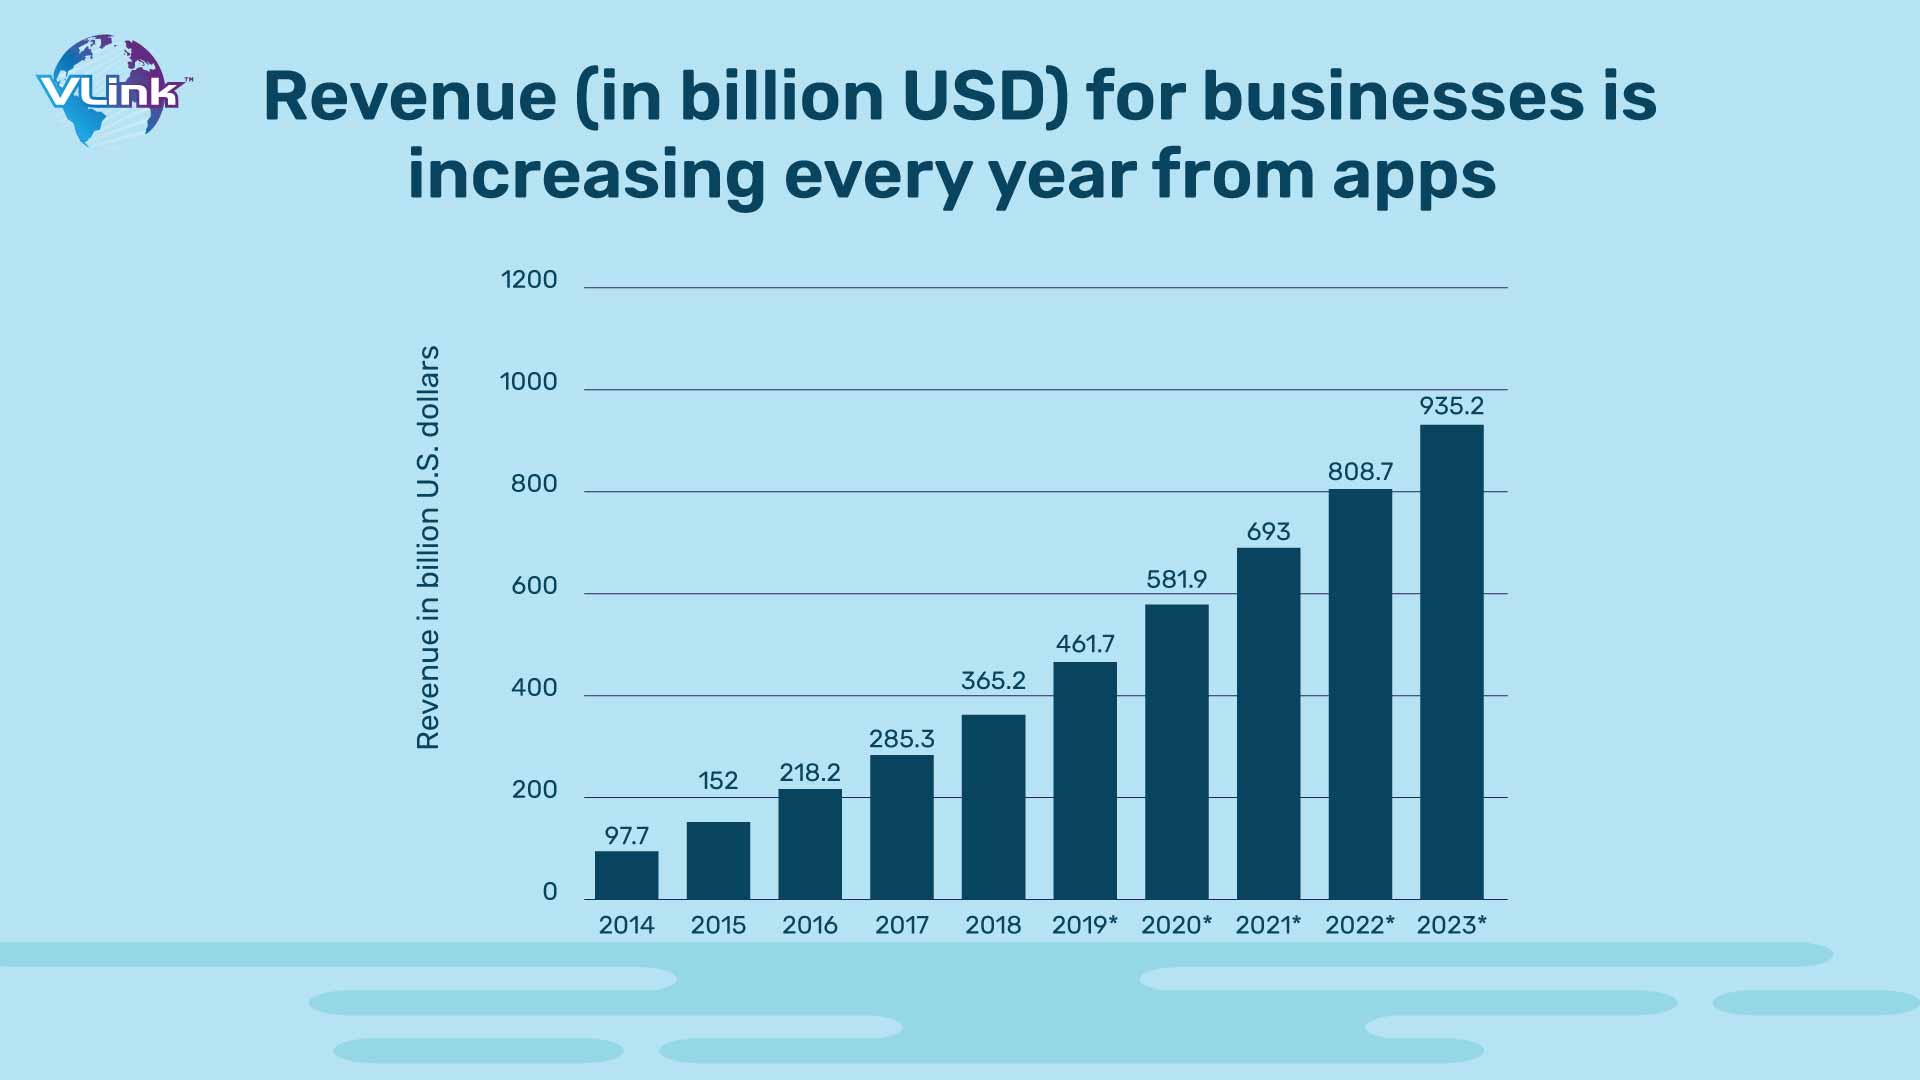 Revenue (in billion USD) for businesses is increasing every year from apps